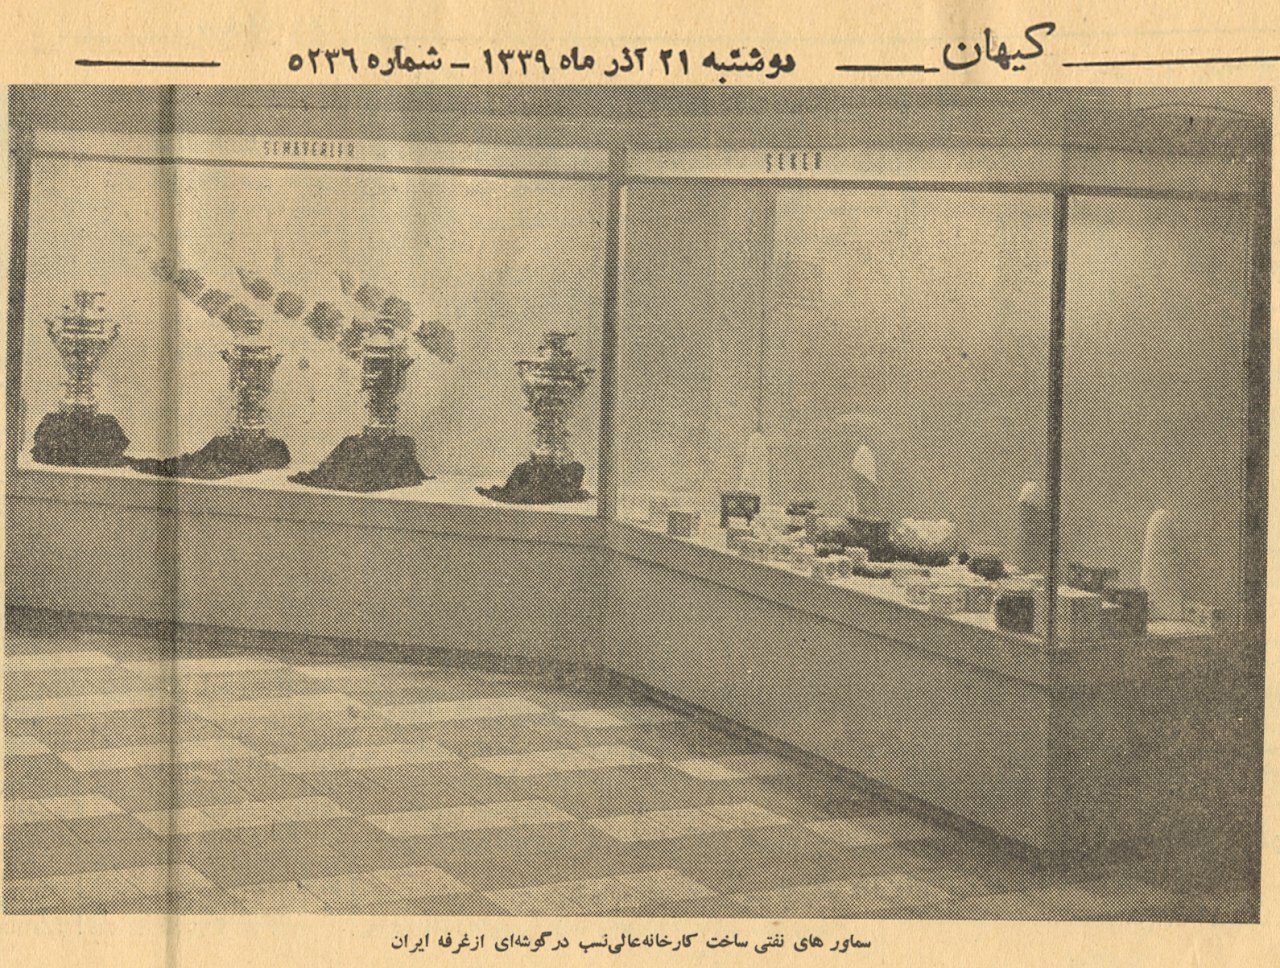 Advertising Alinassab co's products in the past